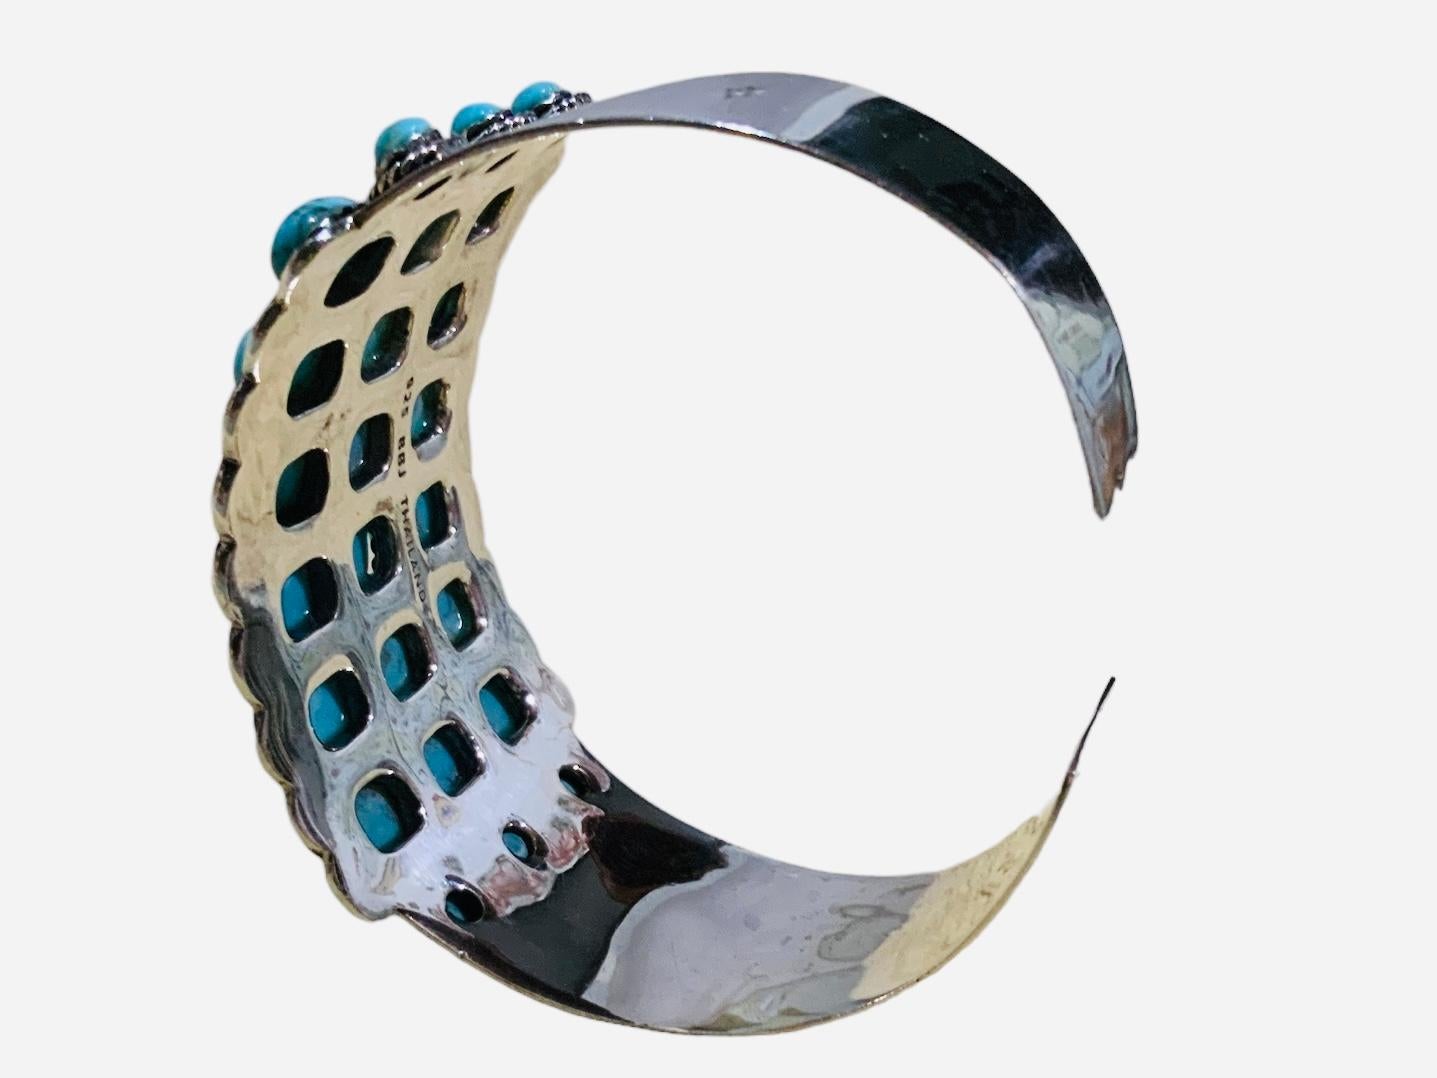  Sterling Silver and Turquoise Cuff Bracelet In Good Condition For Sale In Guaynabo, PR